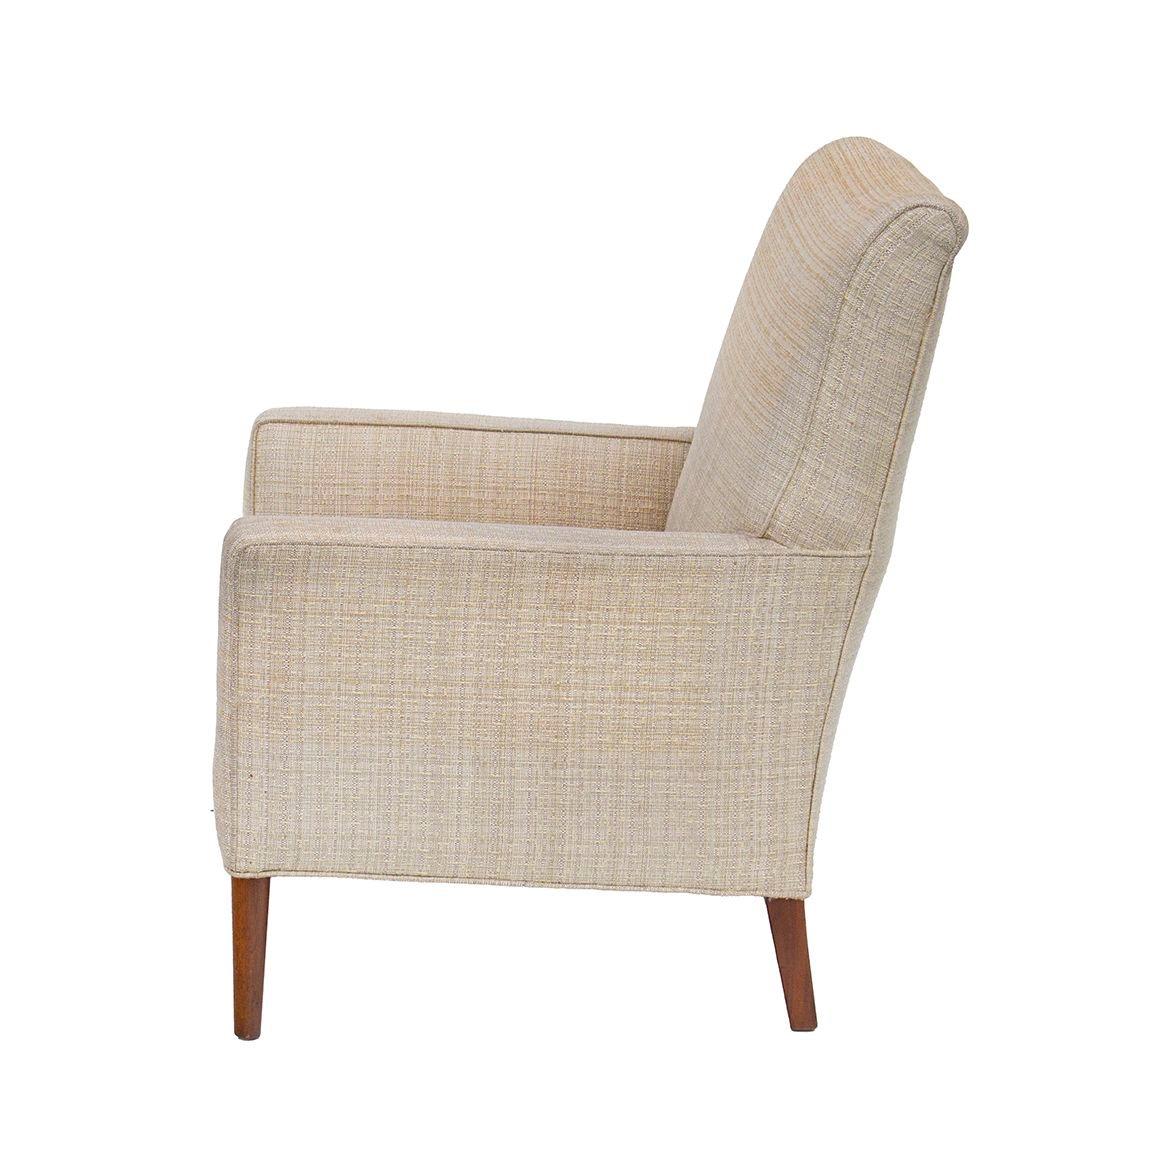 American Midcentury Armchair with nice Moderate Scale For Sale